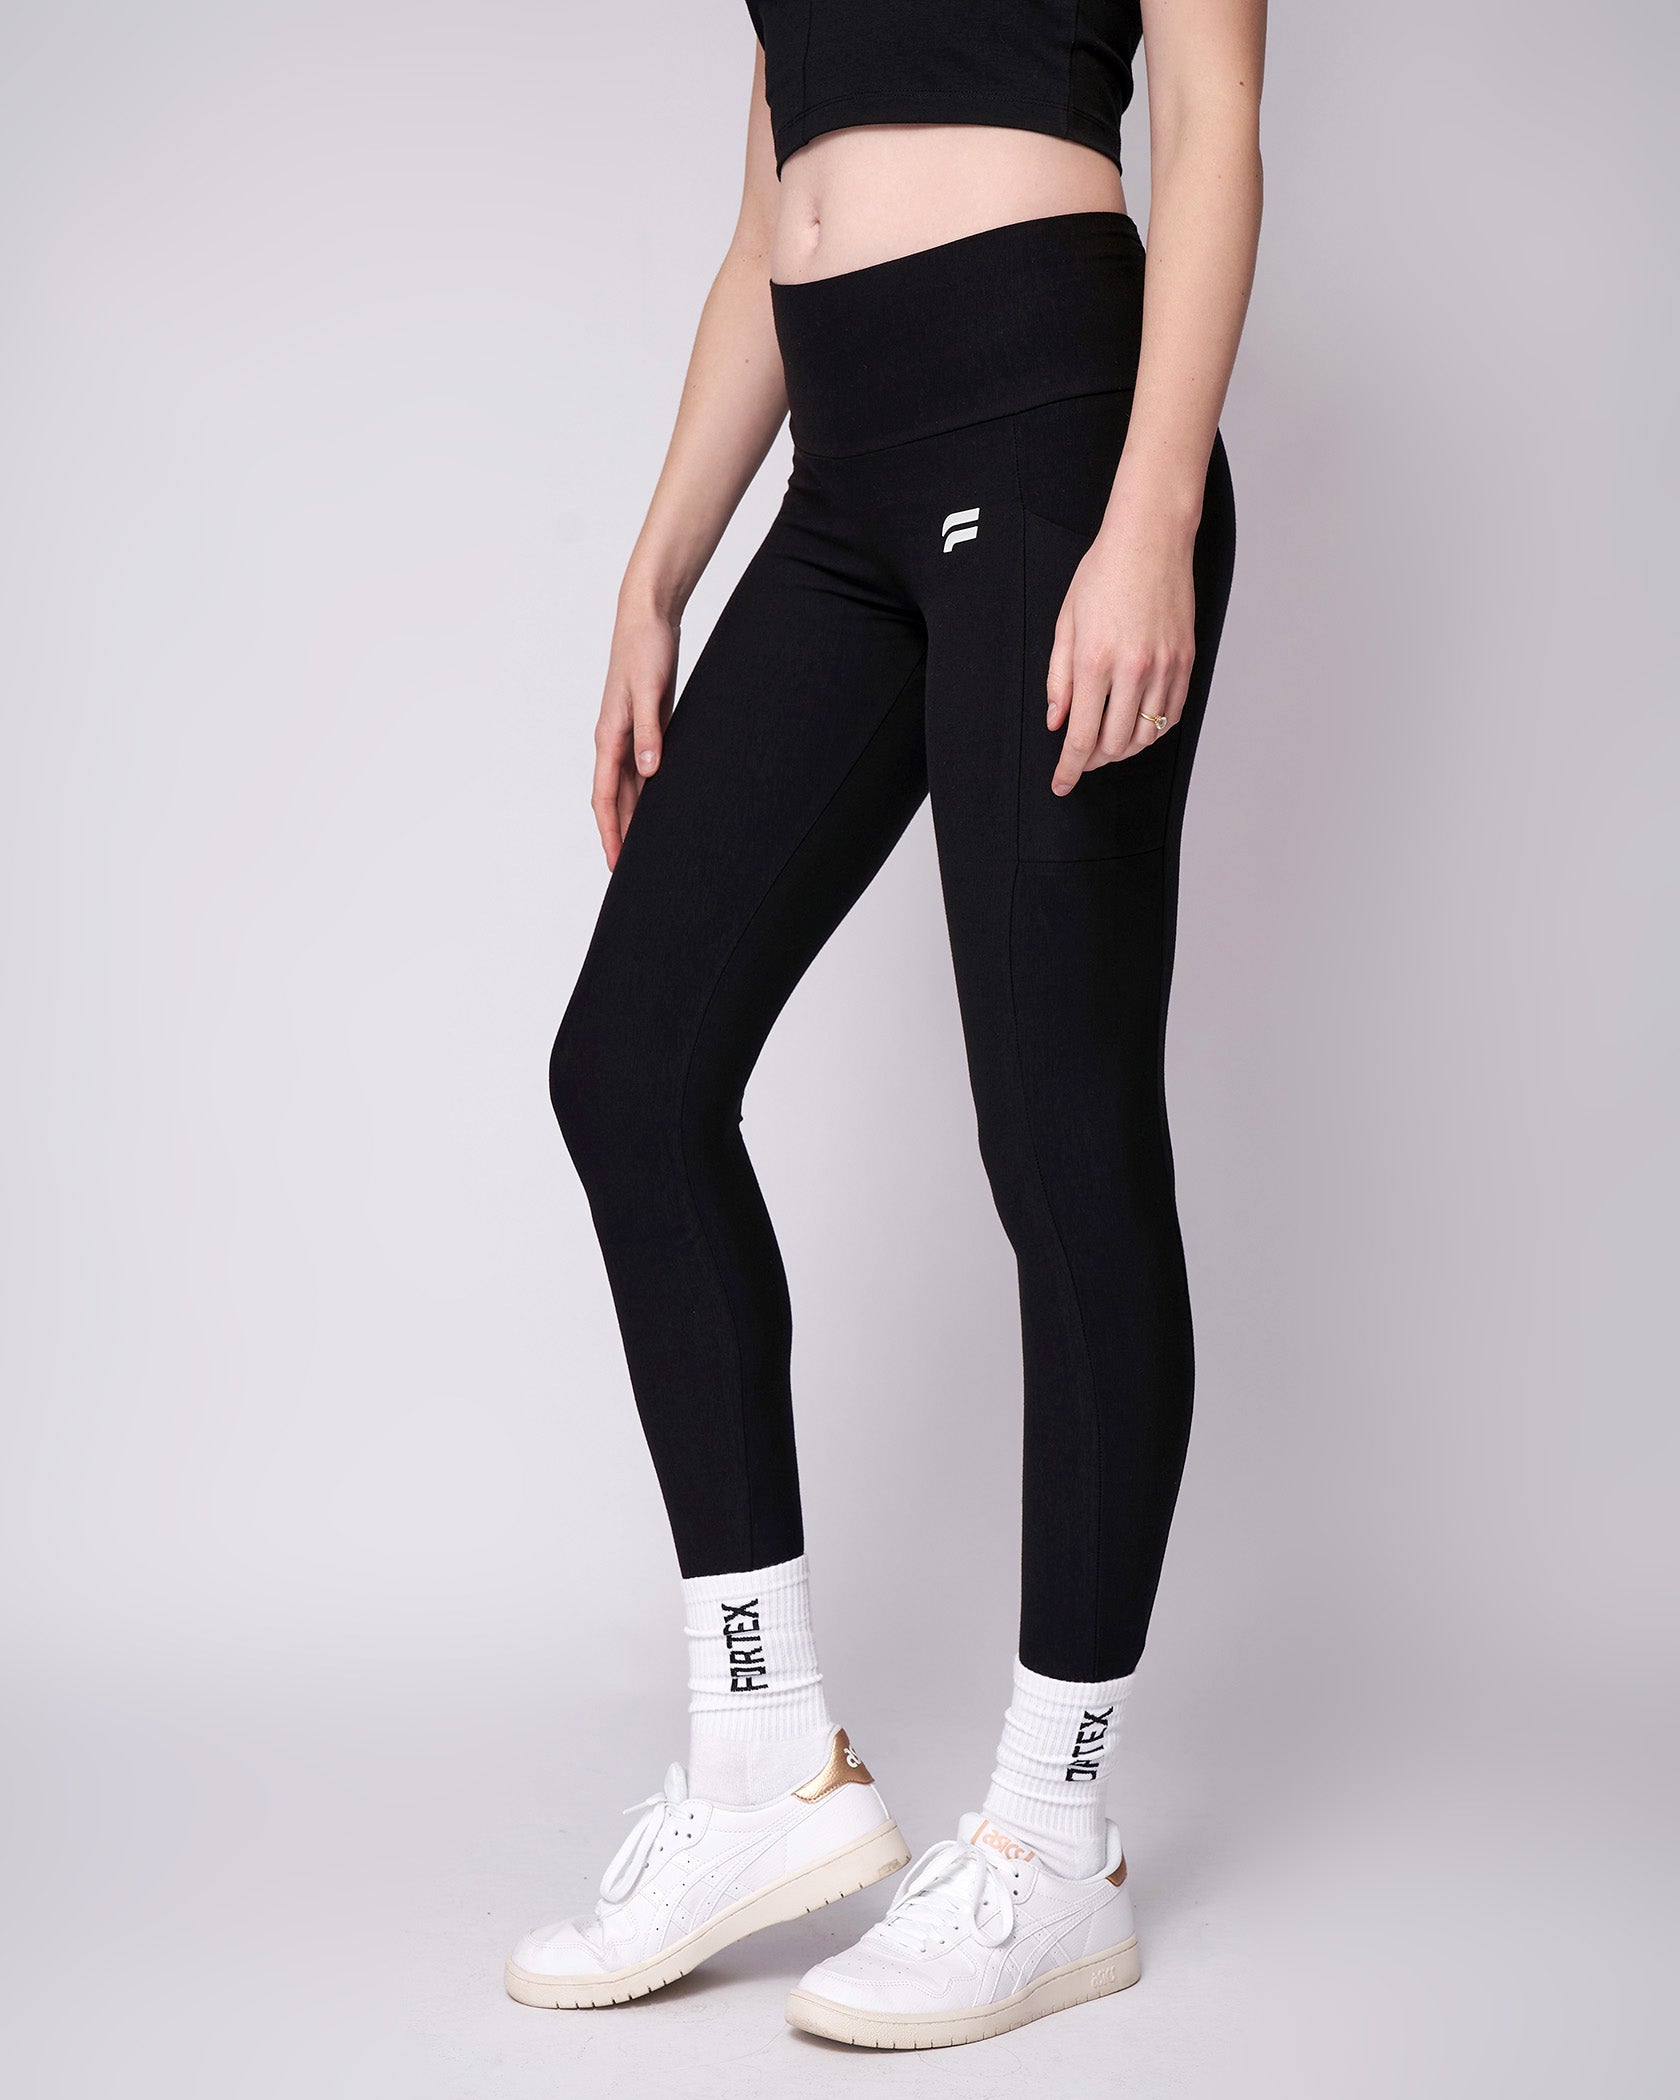 Essential Bamboo Organic Cotton Thick Leggings in Navy